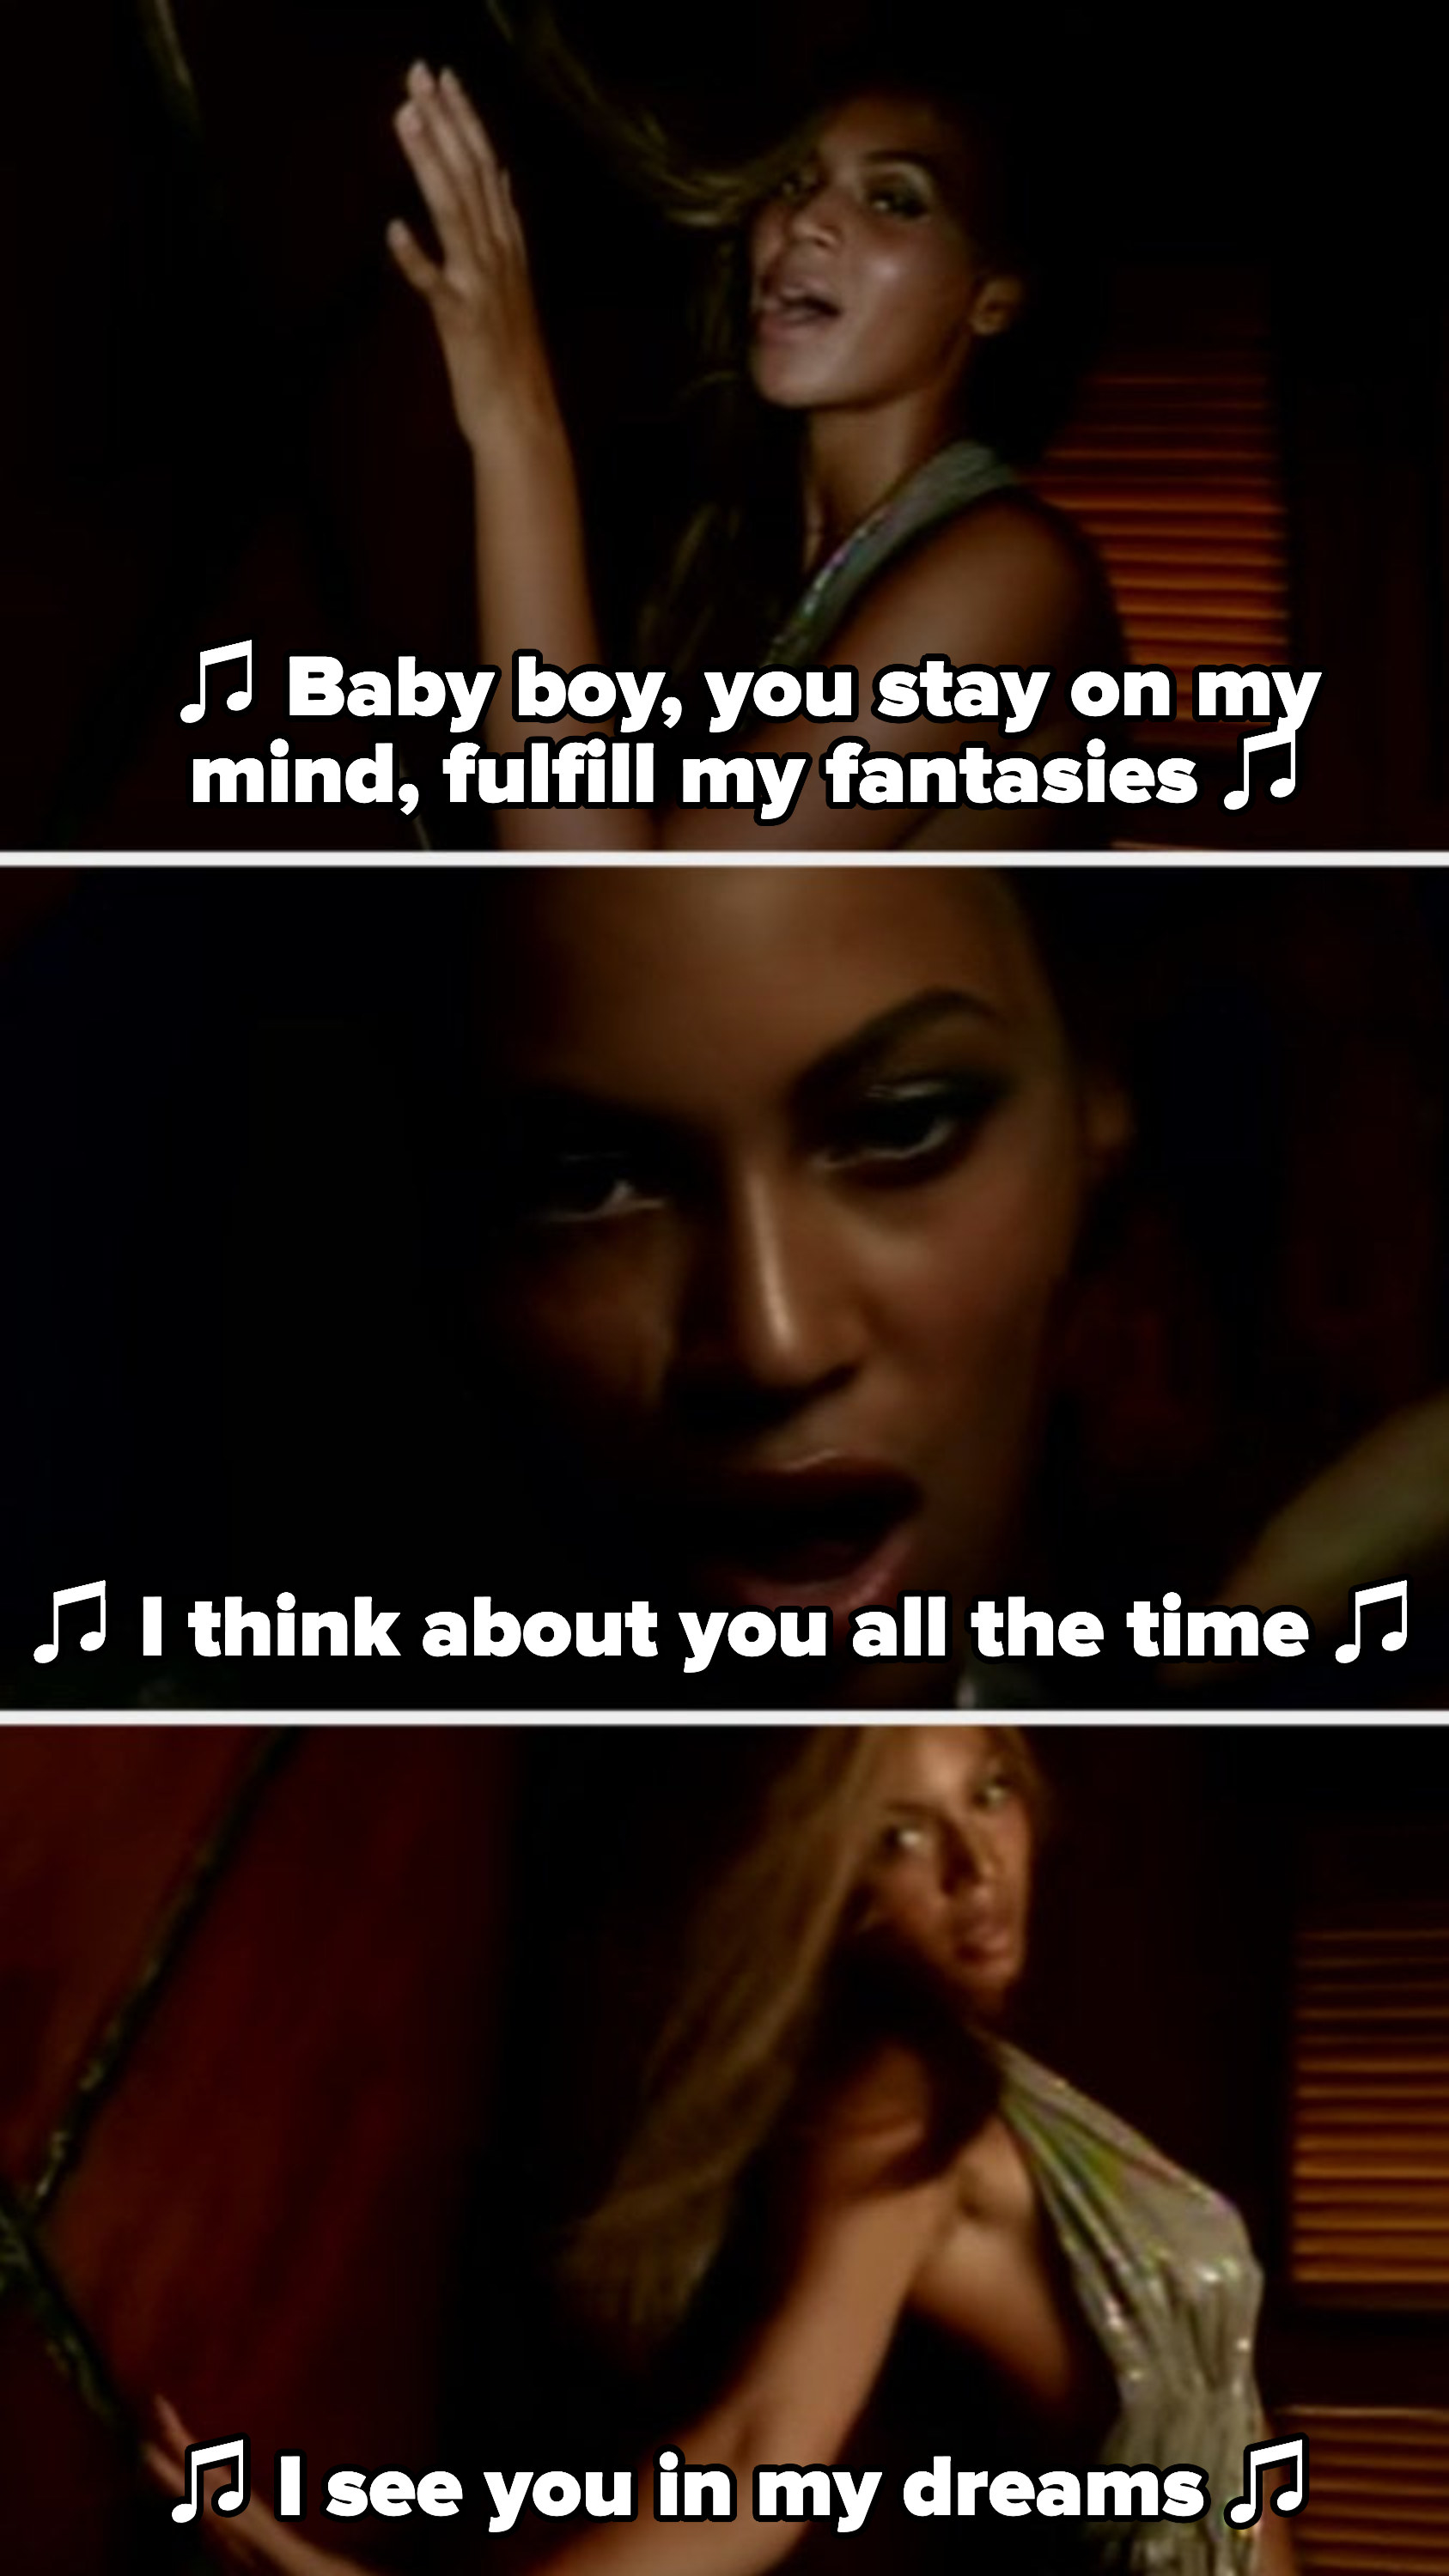 Beyoncé dancing up against a wall in her &quot;Baby Boy&quot; music video, singing: &quot;Baby boy, you stay on my mind, fulfill my fantasies. I think about you all the time, I see you in my dreams&quot;